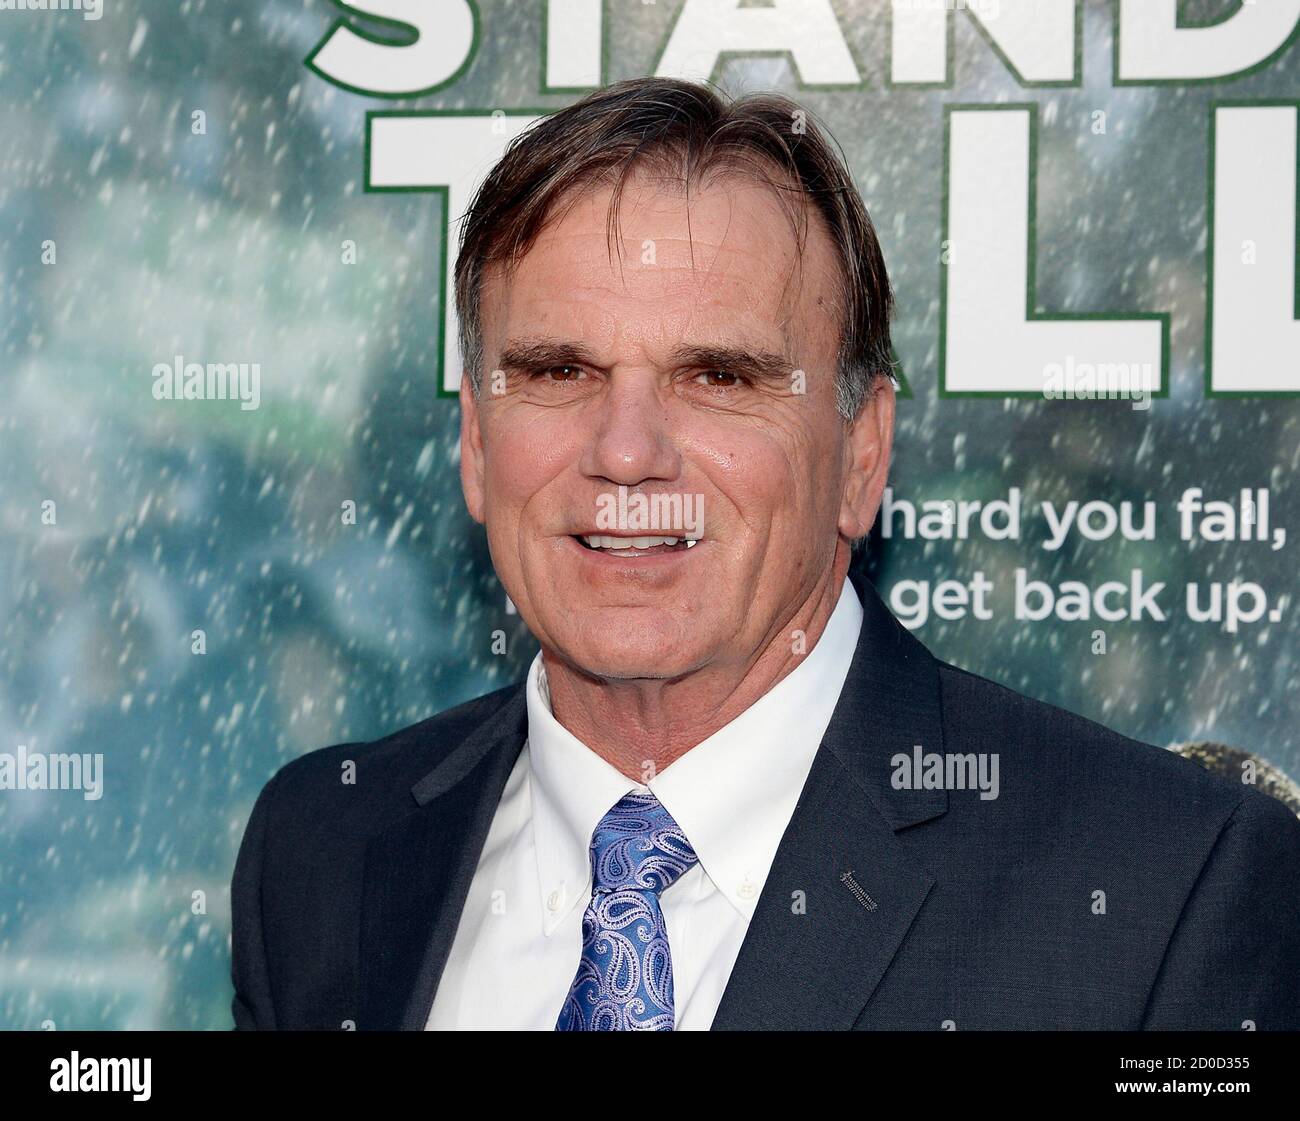 Former football coach Bob Ladouceur poses at the premiere of the film 